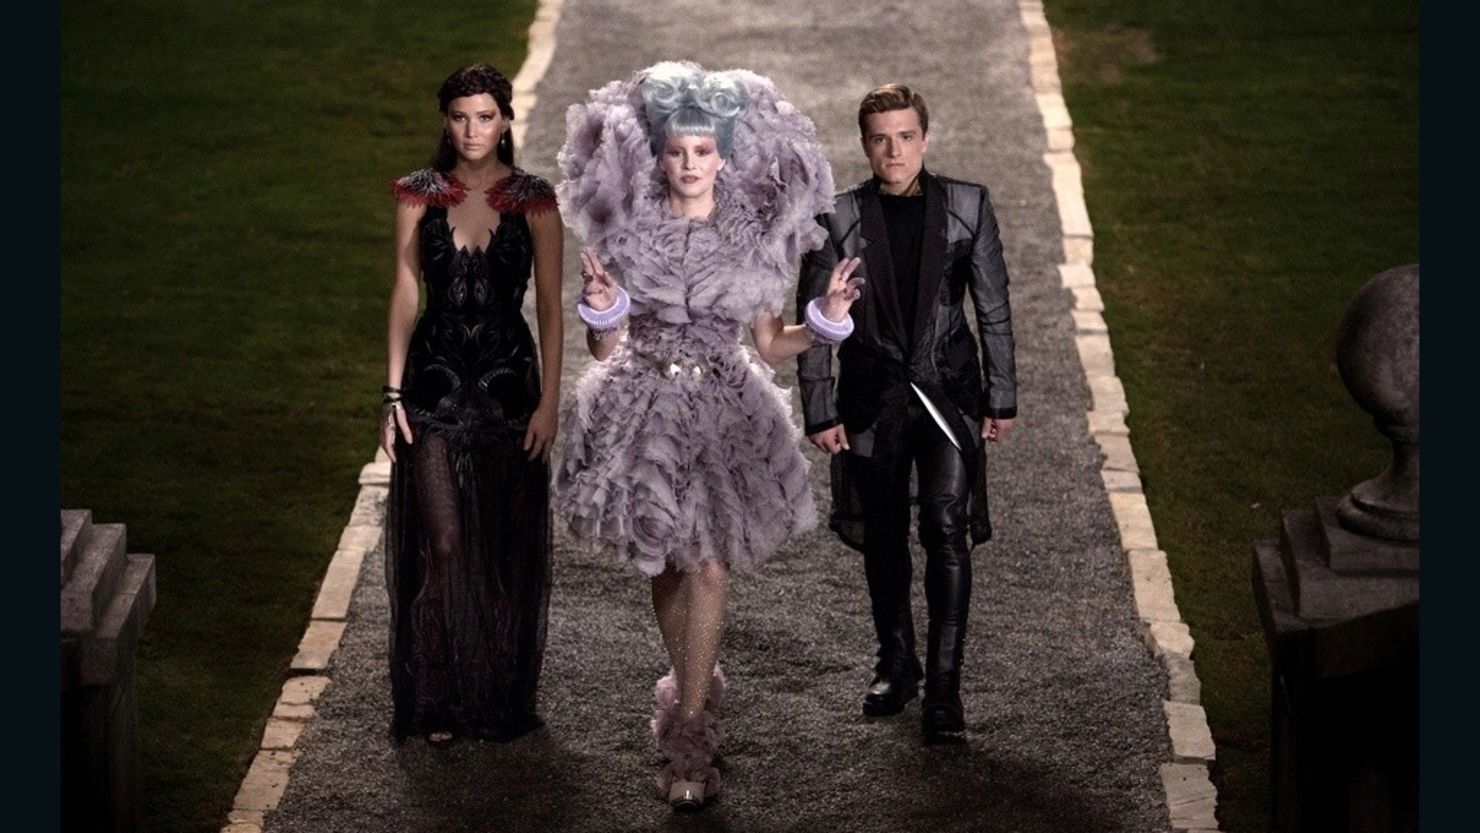 "The Hunger Games" sequel "Catching Fire" is one of many films being presented at San Diego Comic-Con.